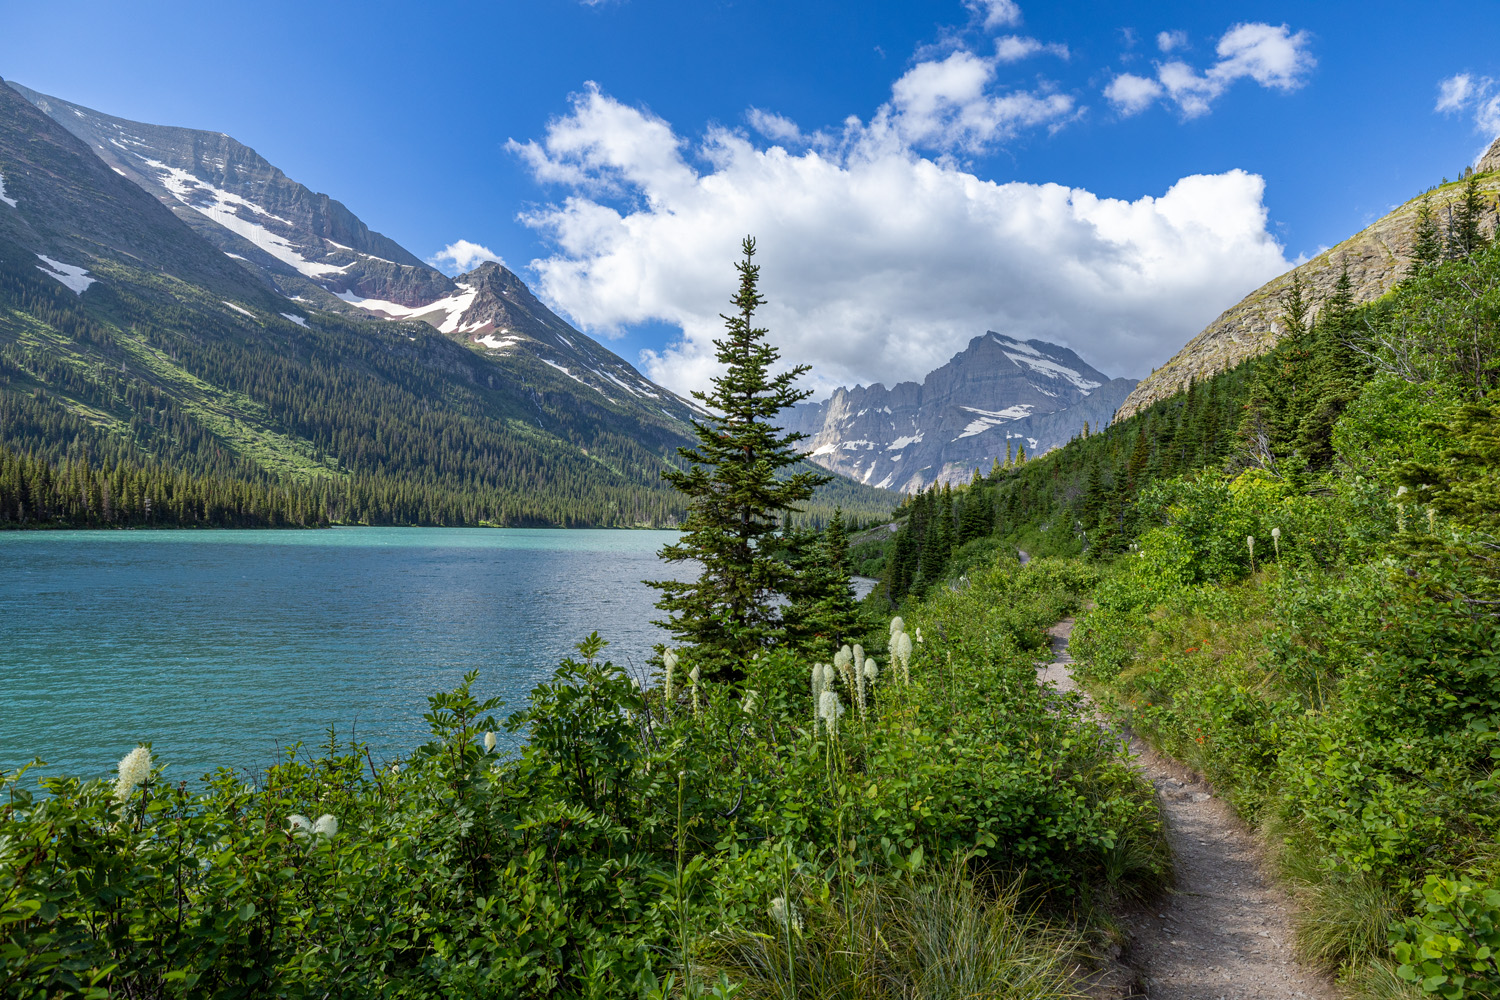 Grinnell Glacier trail passes along the north shores of Josephine Lake, an area frequently closed due to bear activity.